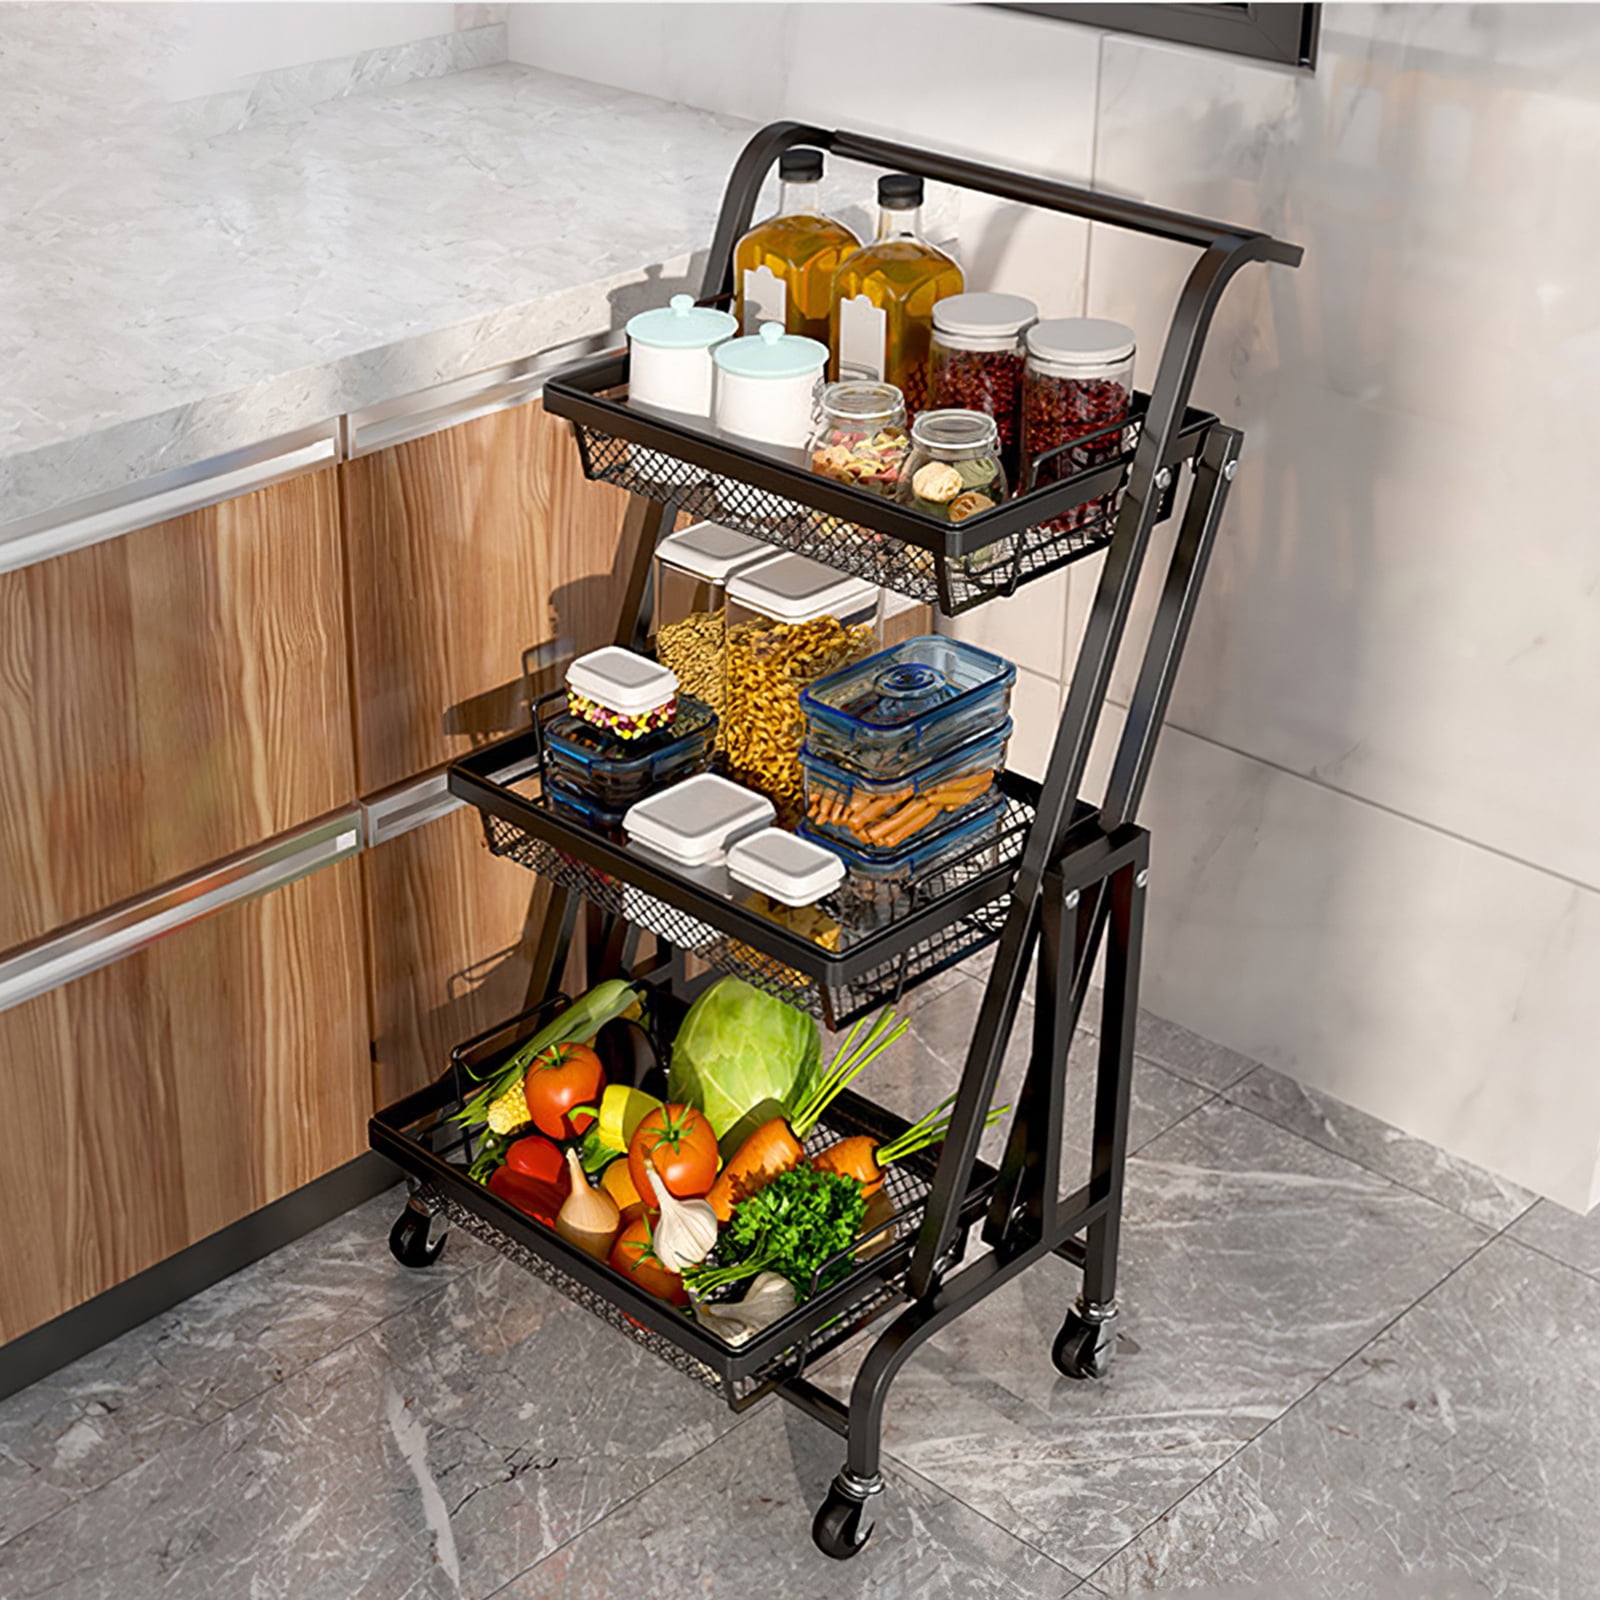 Storage Trolleys Rolling Utility Organization Cart Multi-function Metal Household 3-Tier Kitchen Heavy Duty Tower Rack Shelf With Mesh Basket and Wheels for Kitchen Bathroom Office Library Salon 